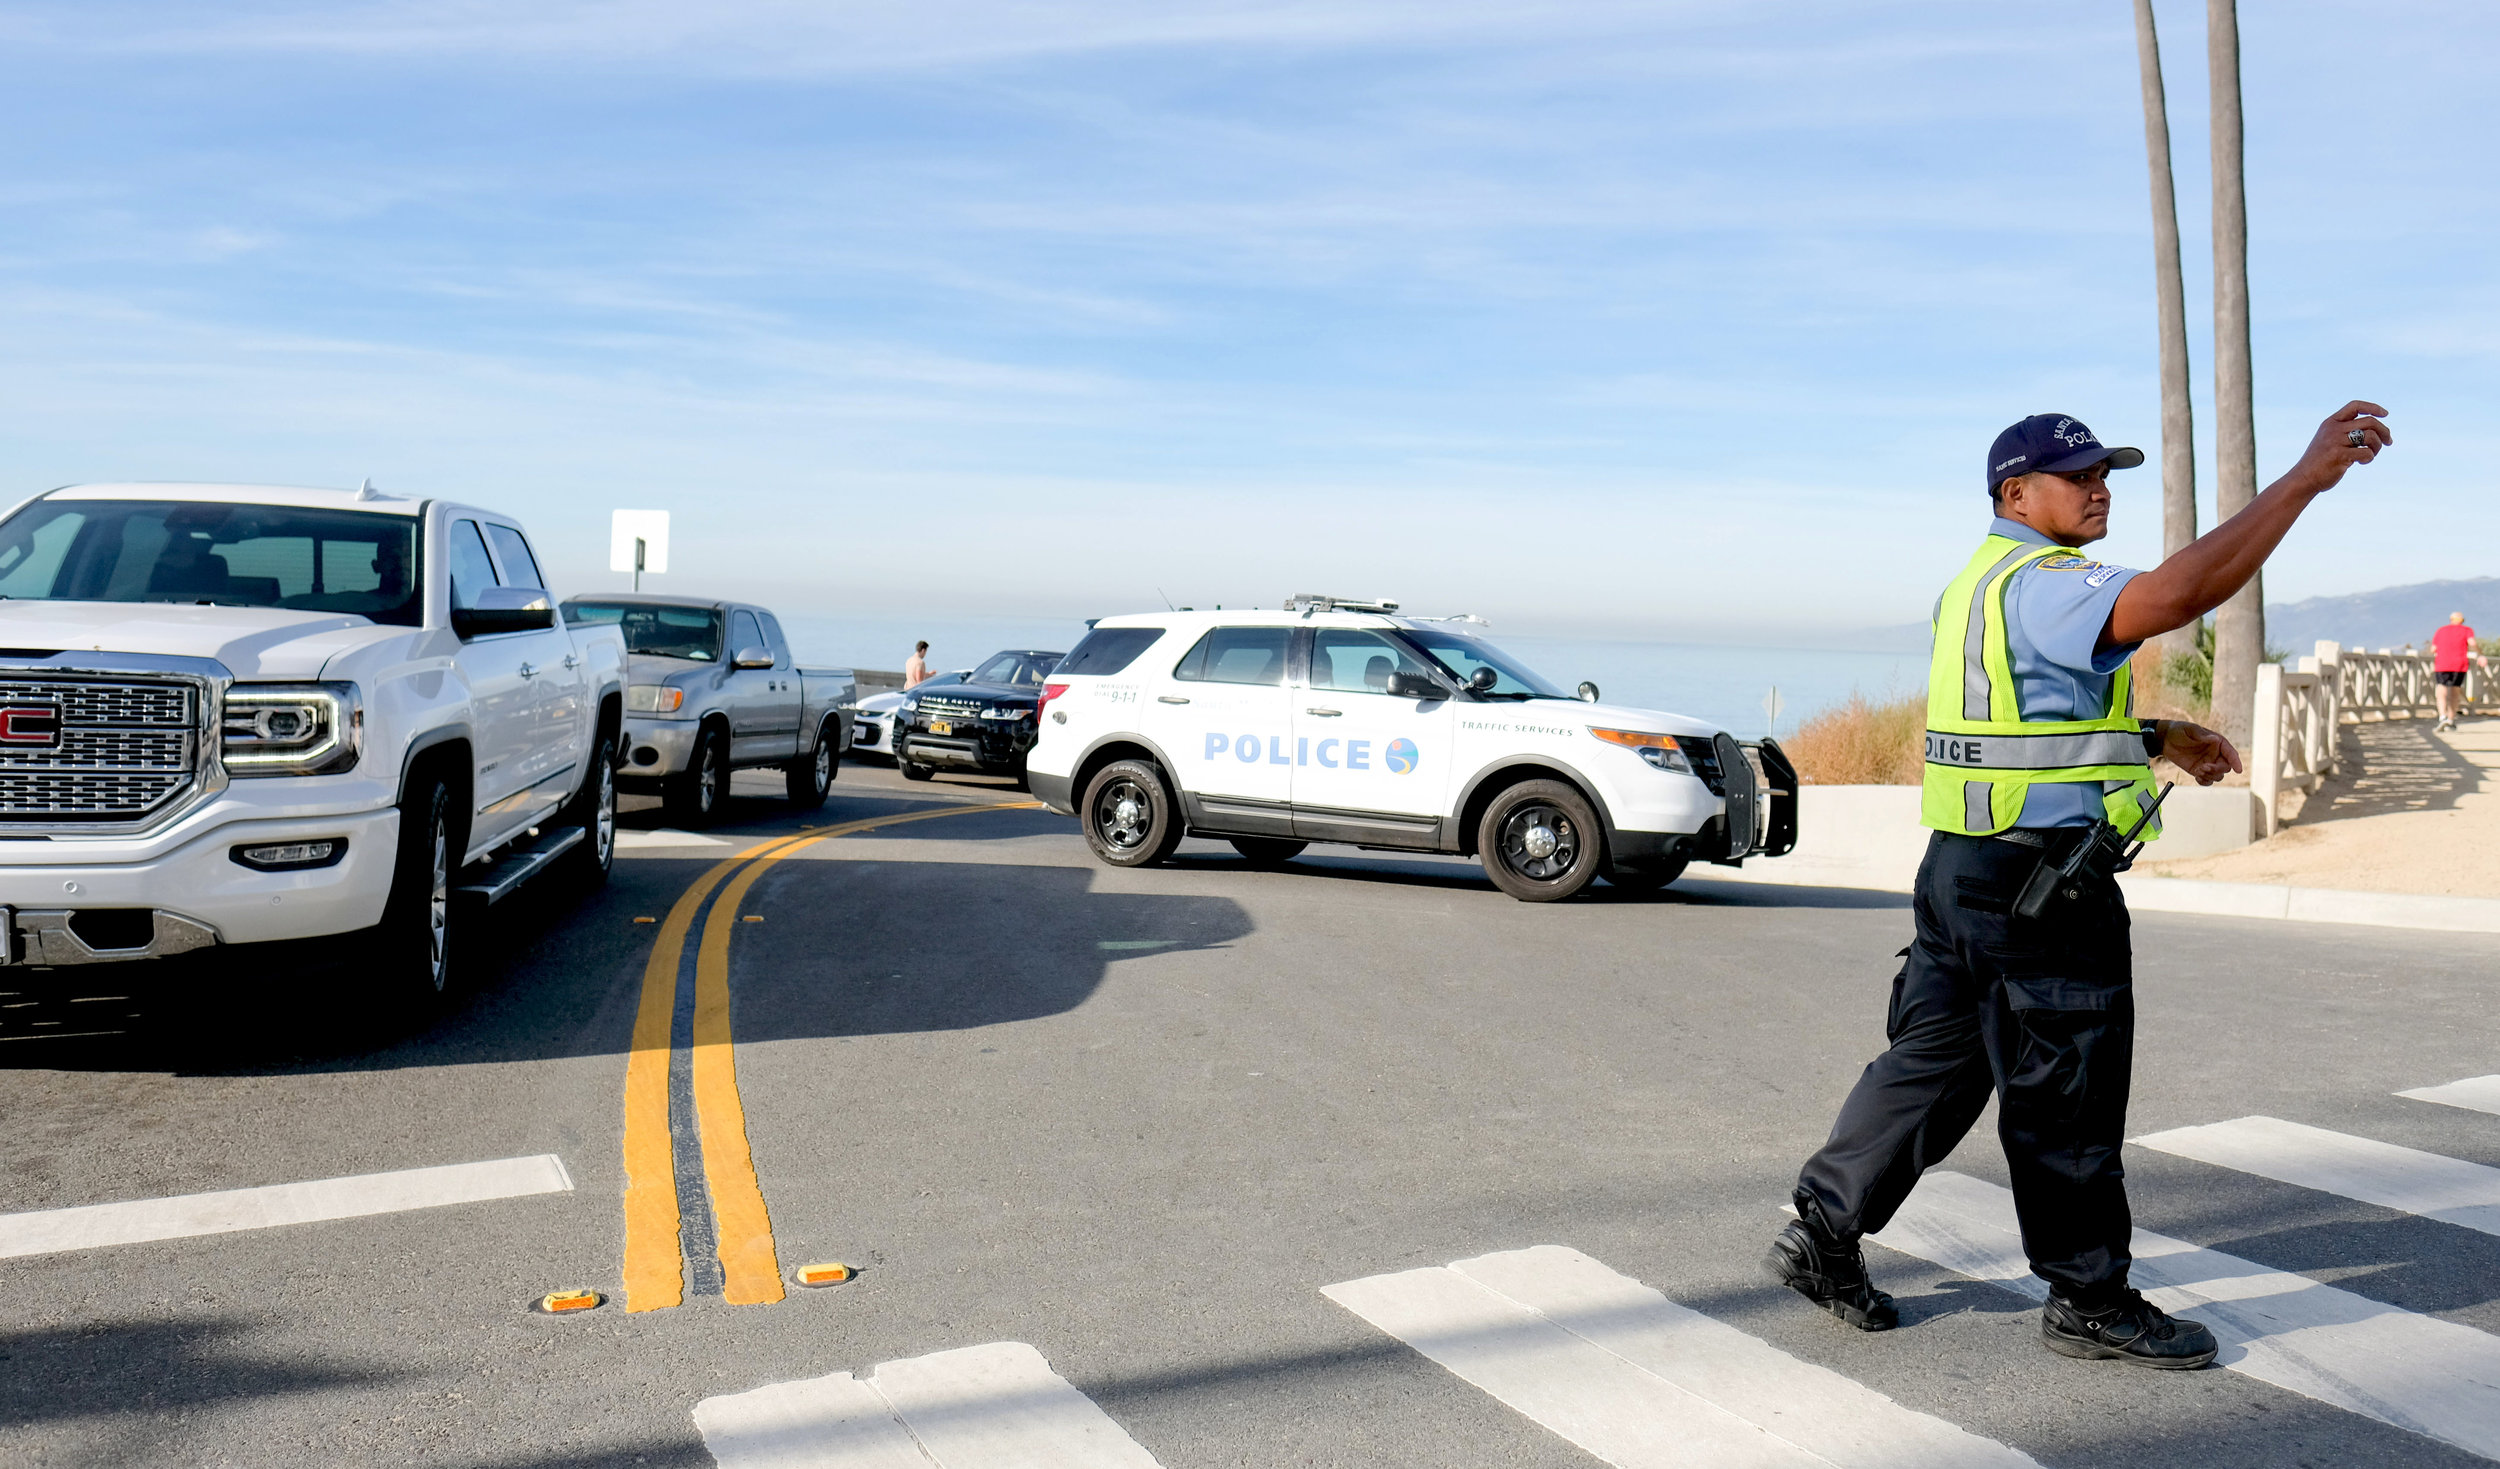  Santa Monica Police directing traffic at the intersection of Ocean Avenue and California Ave. Traffic was being diverted because of a fatal car accident on the morning of November 21, 2017 in Santa Monica, CA. (Photo by Jayrol San Jose) 